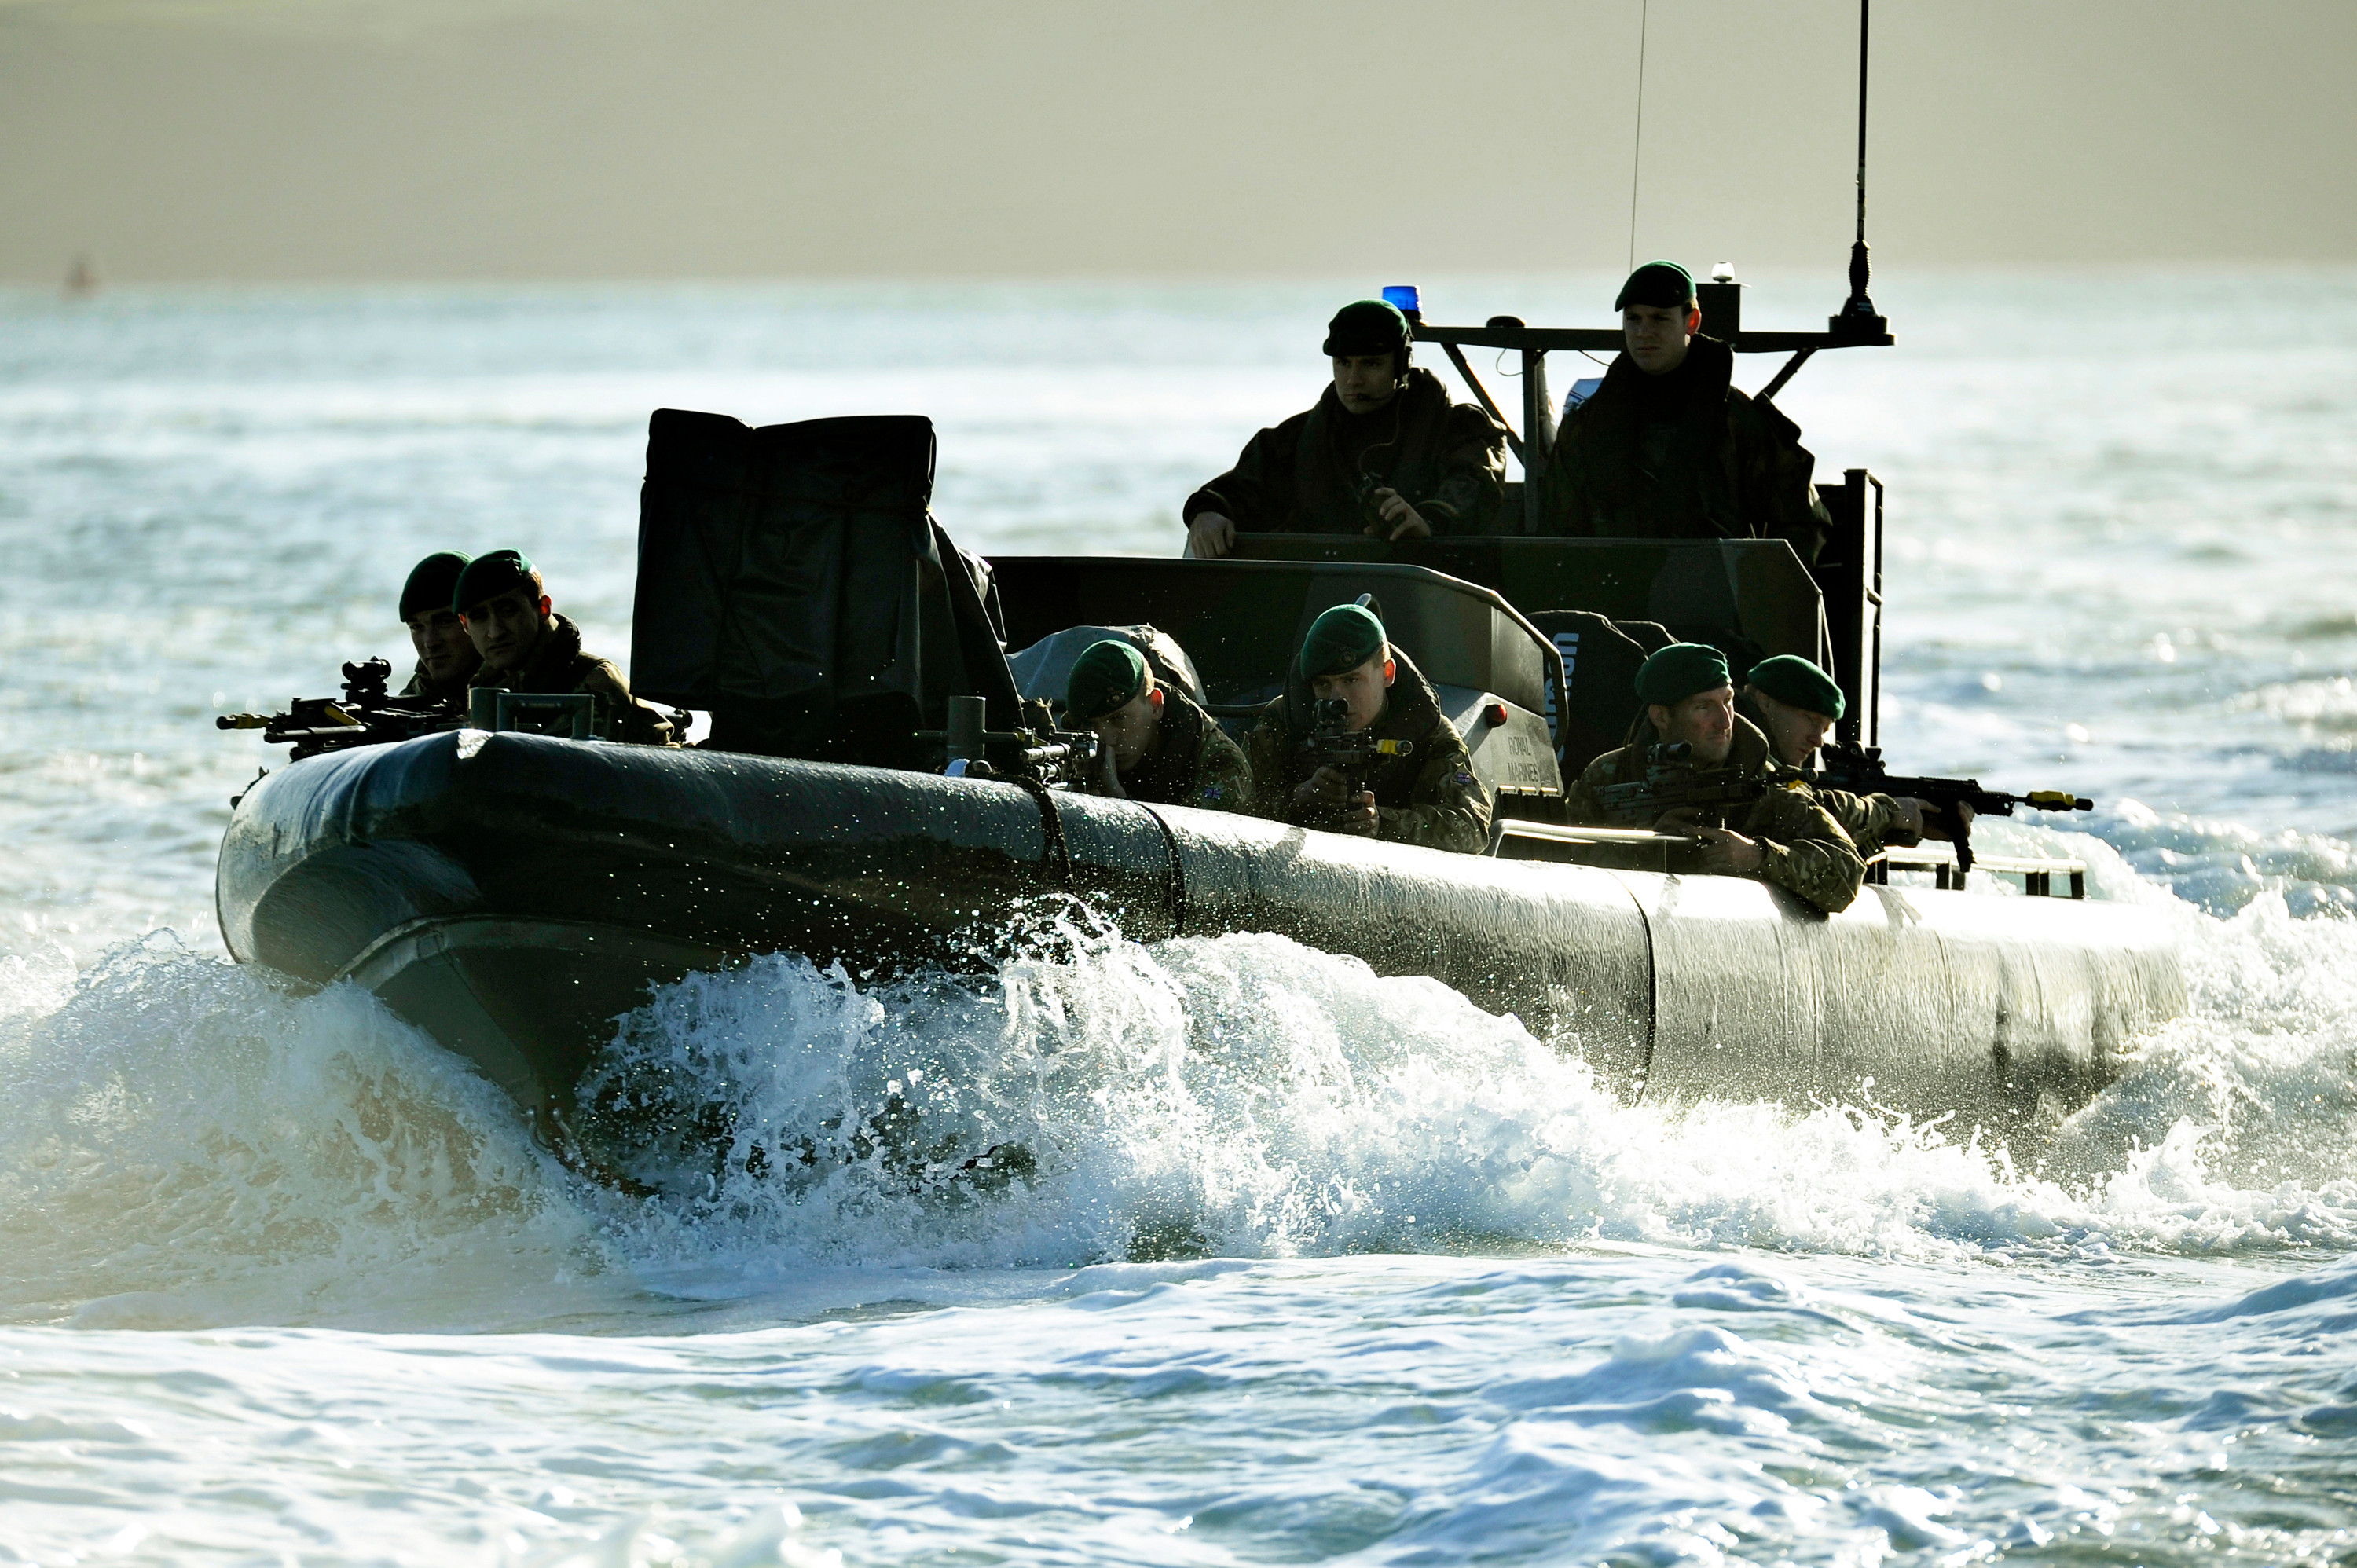  Members of the elite Special Boat Service (SBS) are reportedly heading to the Gulf